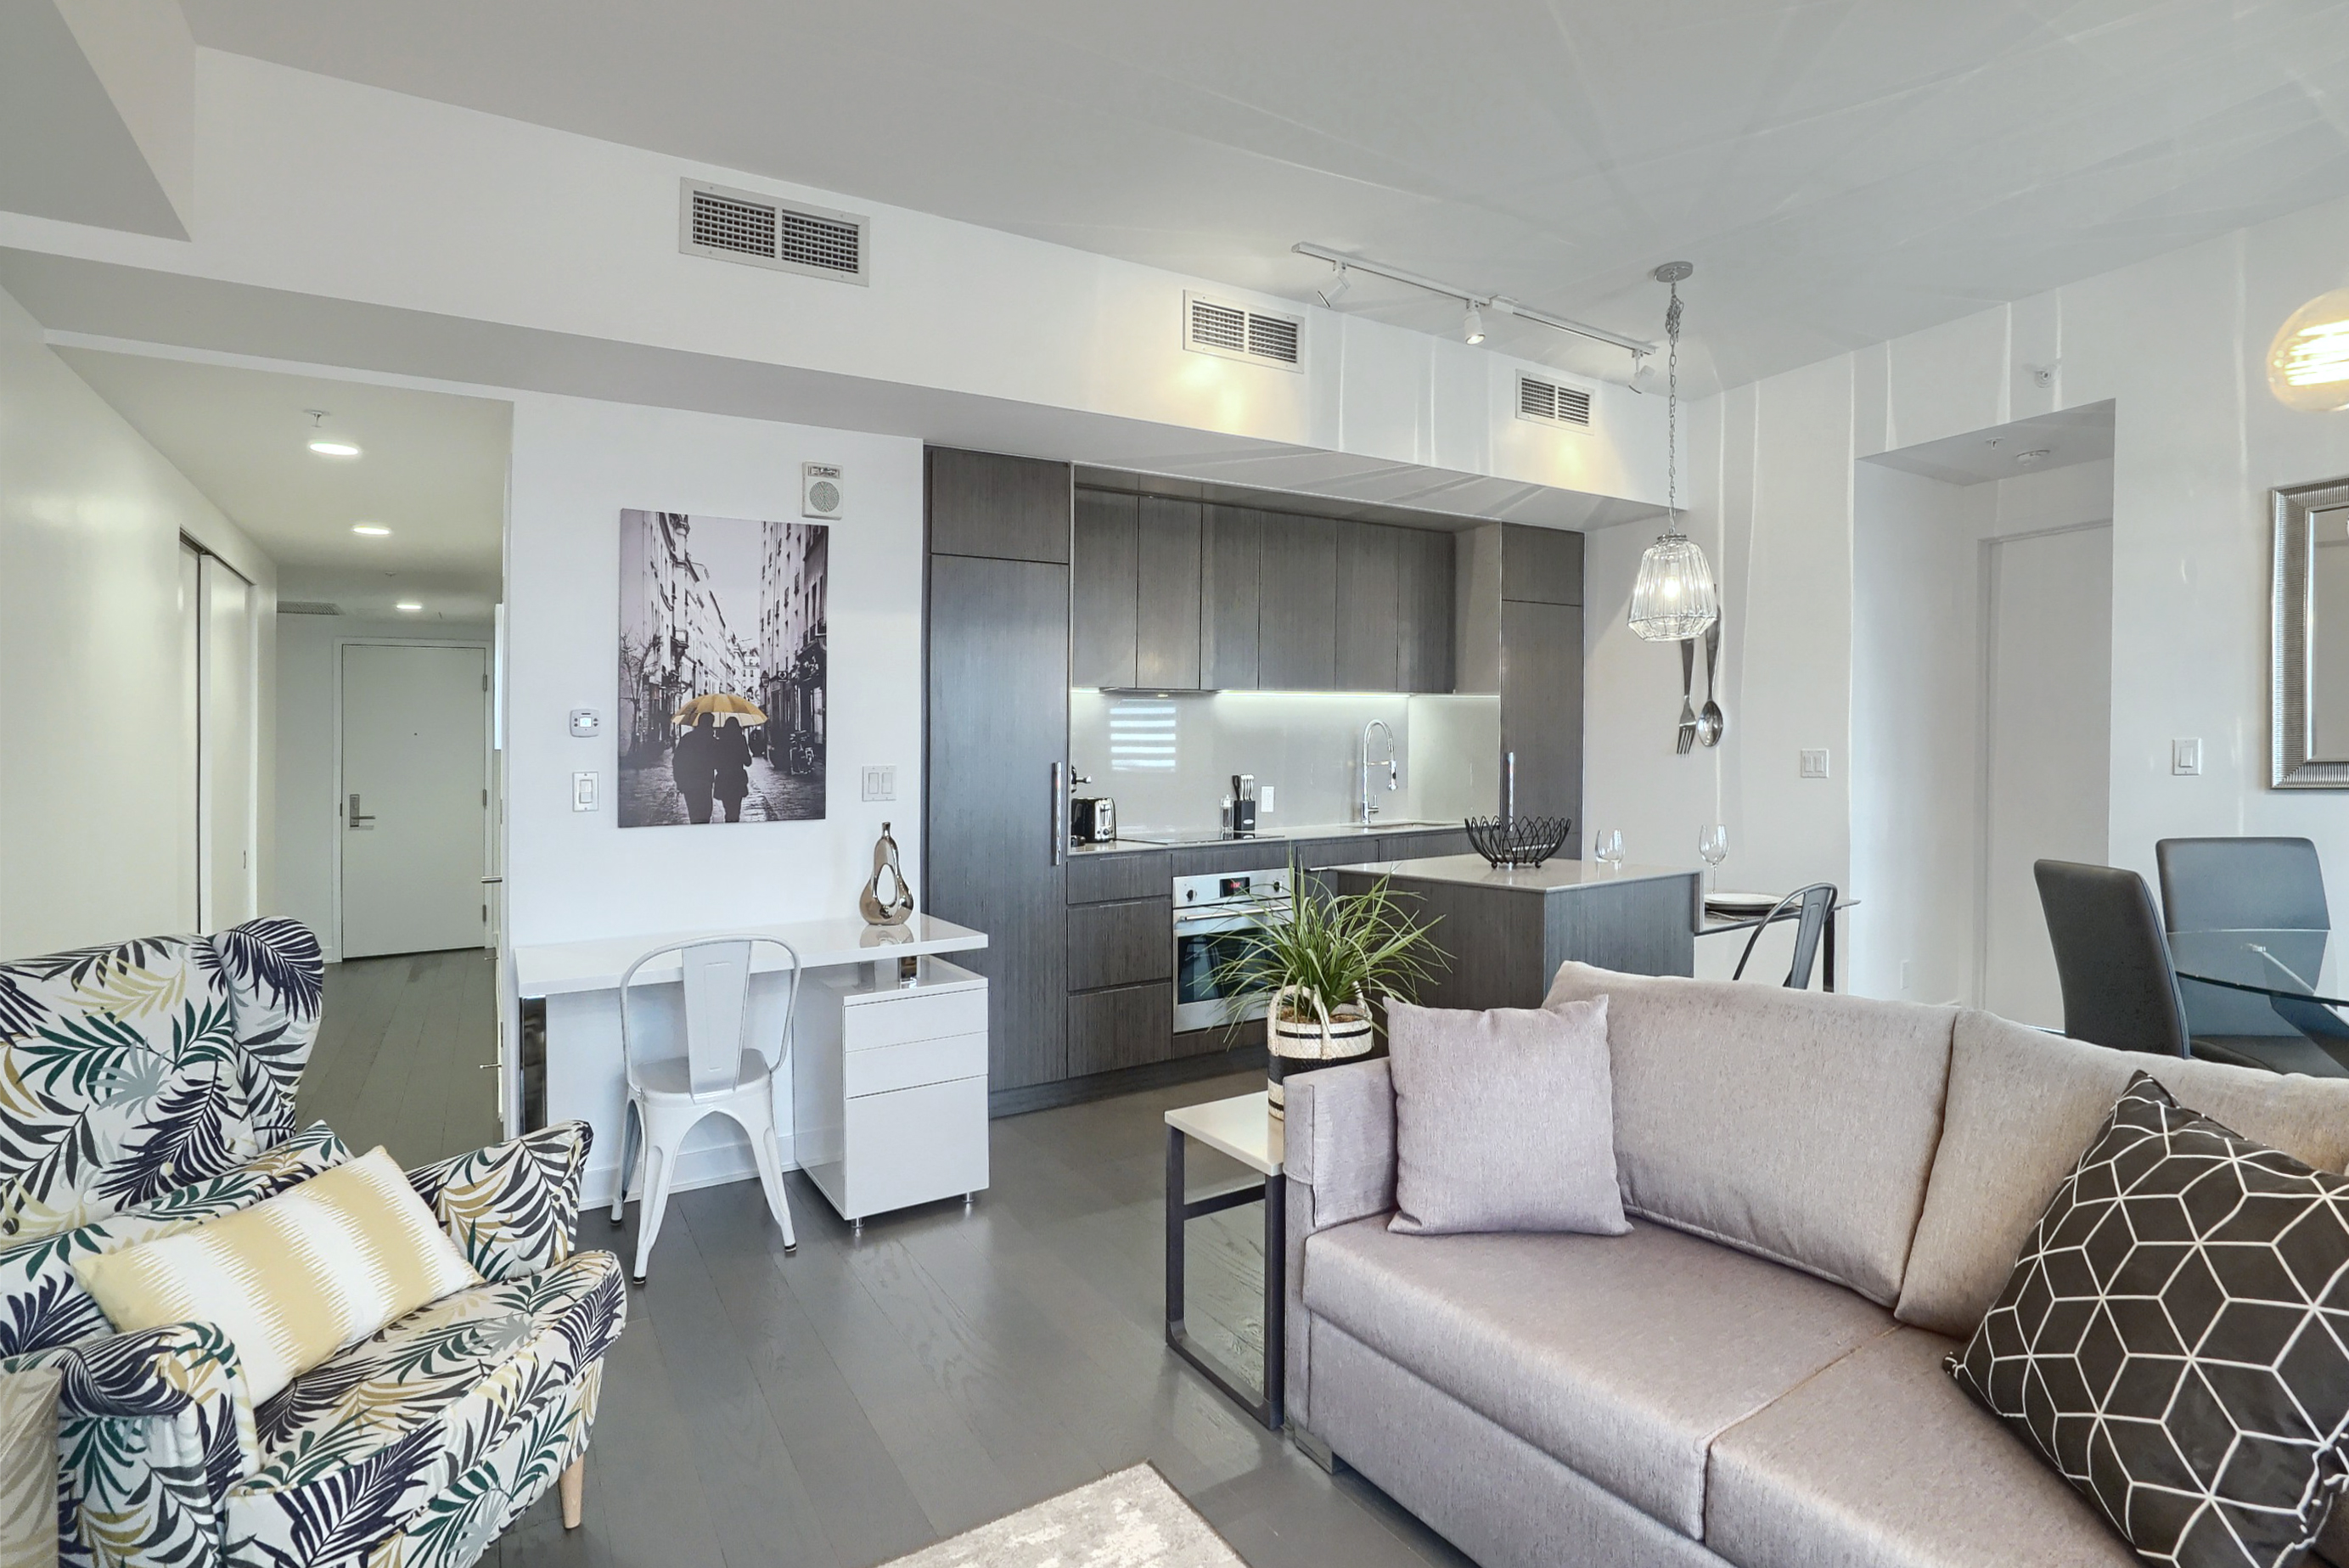 View into the living room and kitchen areas. Light gray cloth couch, white walls, darker wood flooring, decor accents throughout. Desk with chair and modern kitchen make this furnished rental in montreal perfect